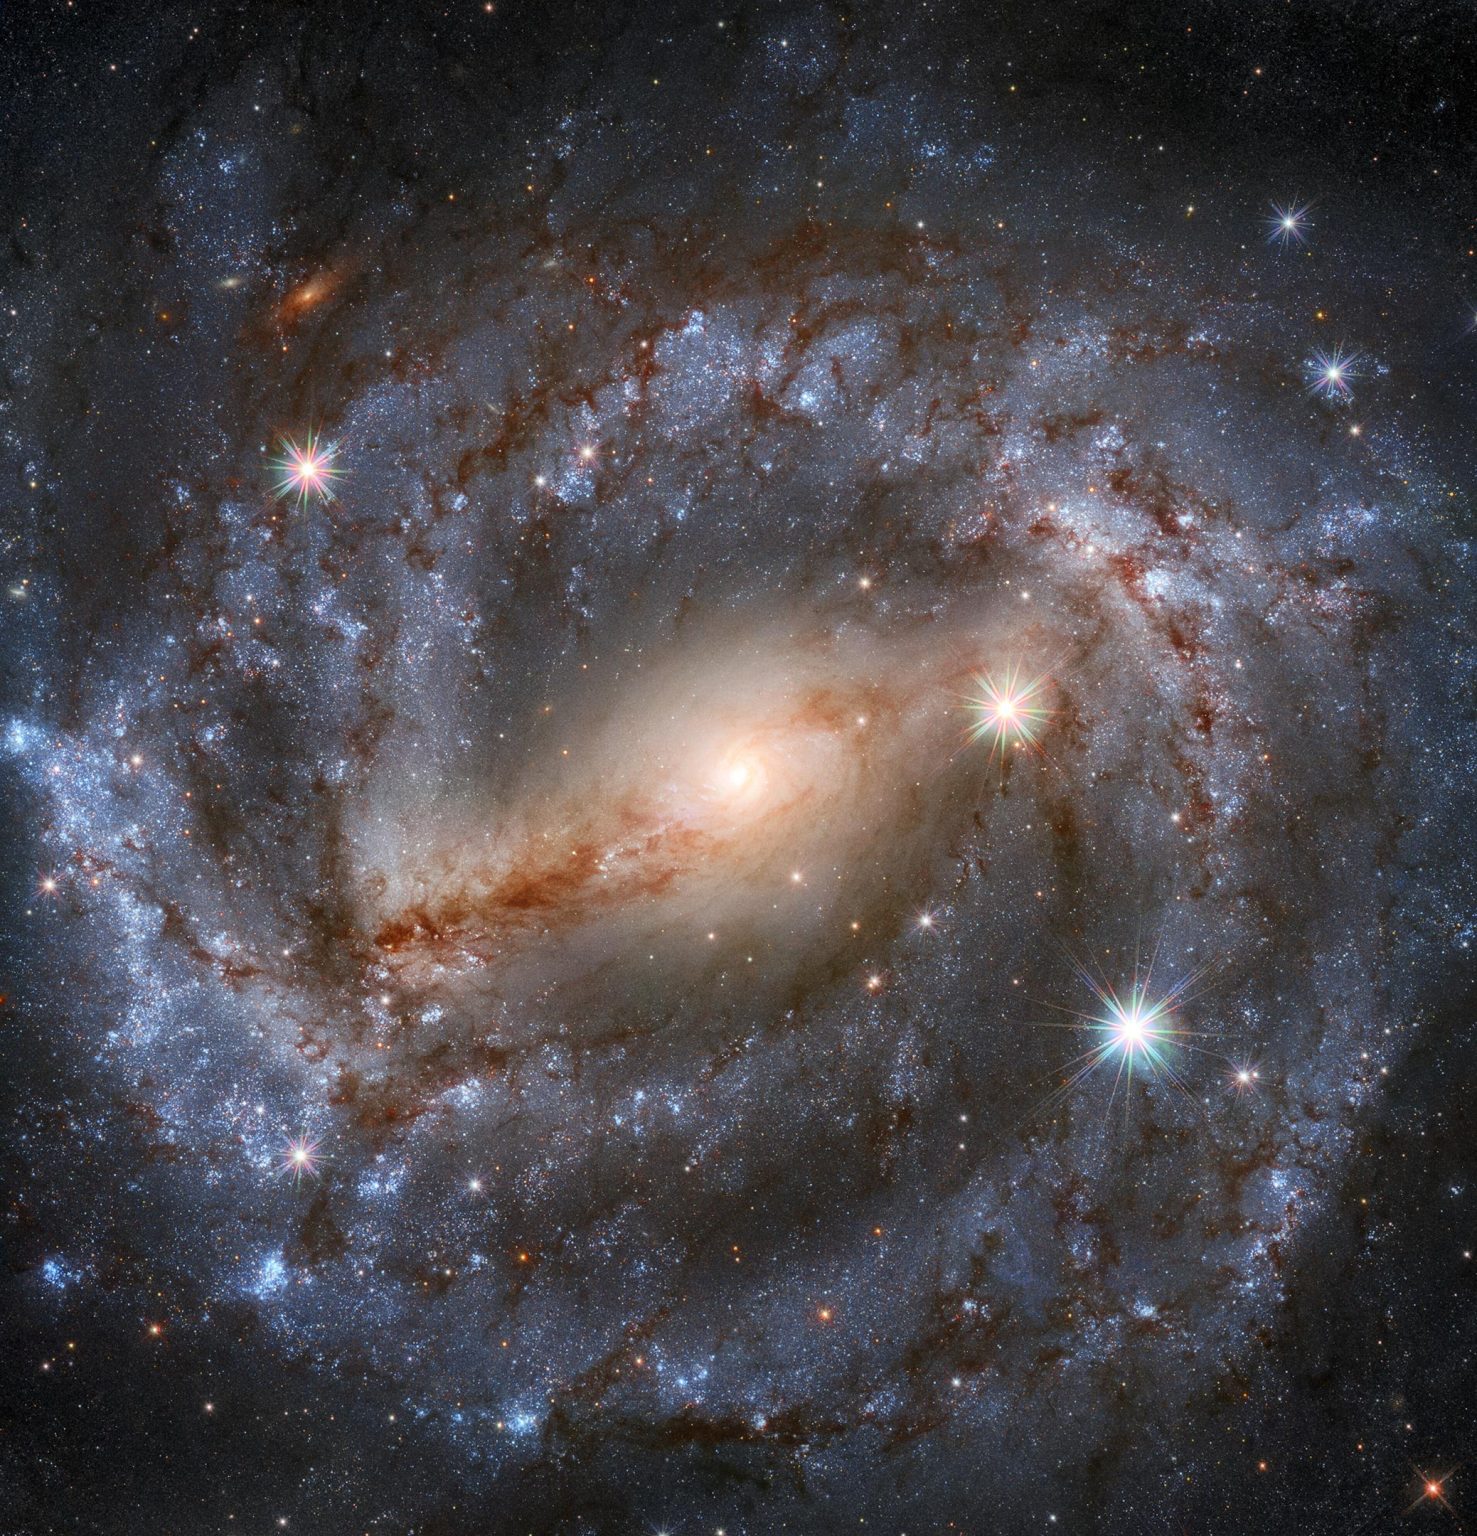 This Stunning Spiral Galaxy Is Mesmerizing – Image Took 9 Hours